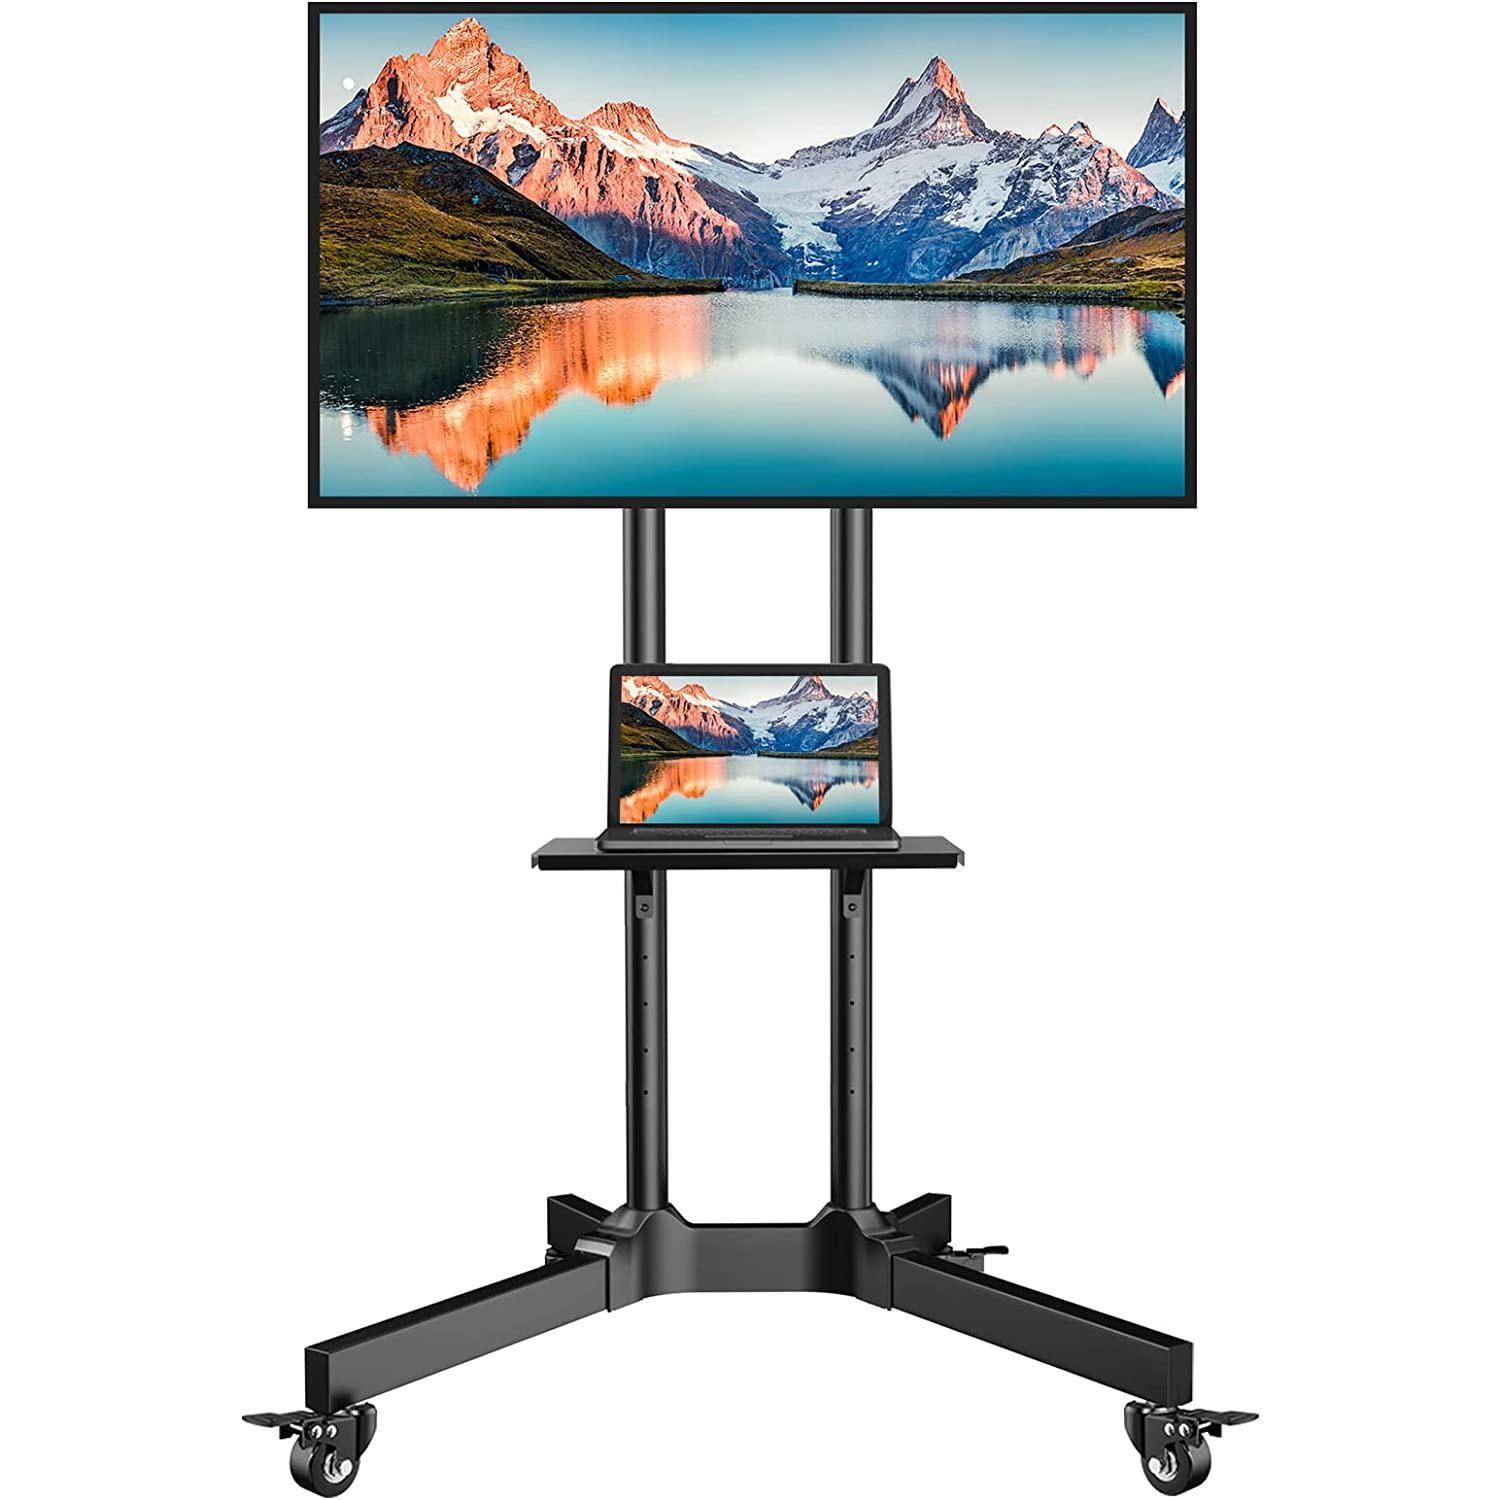 Perlegear Rolling TV Stand for 32-83 Inch Screens for $69.99 Shipped